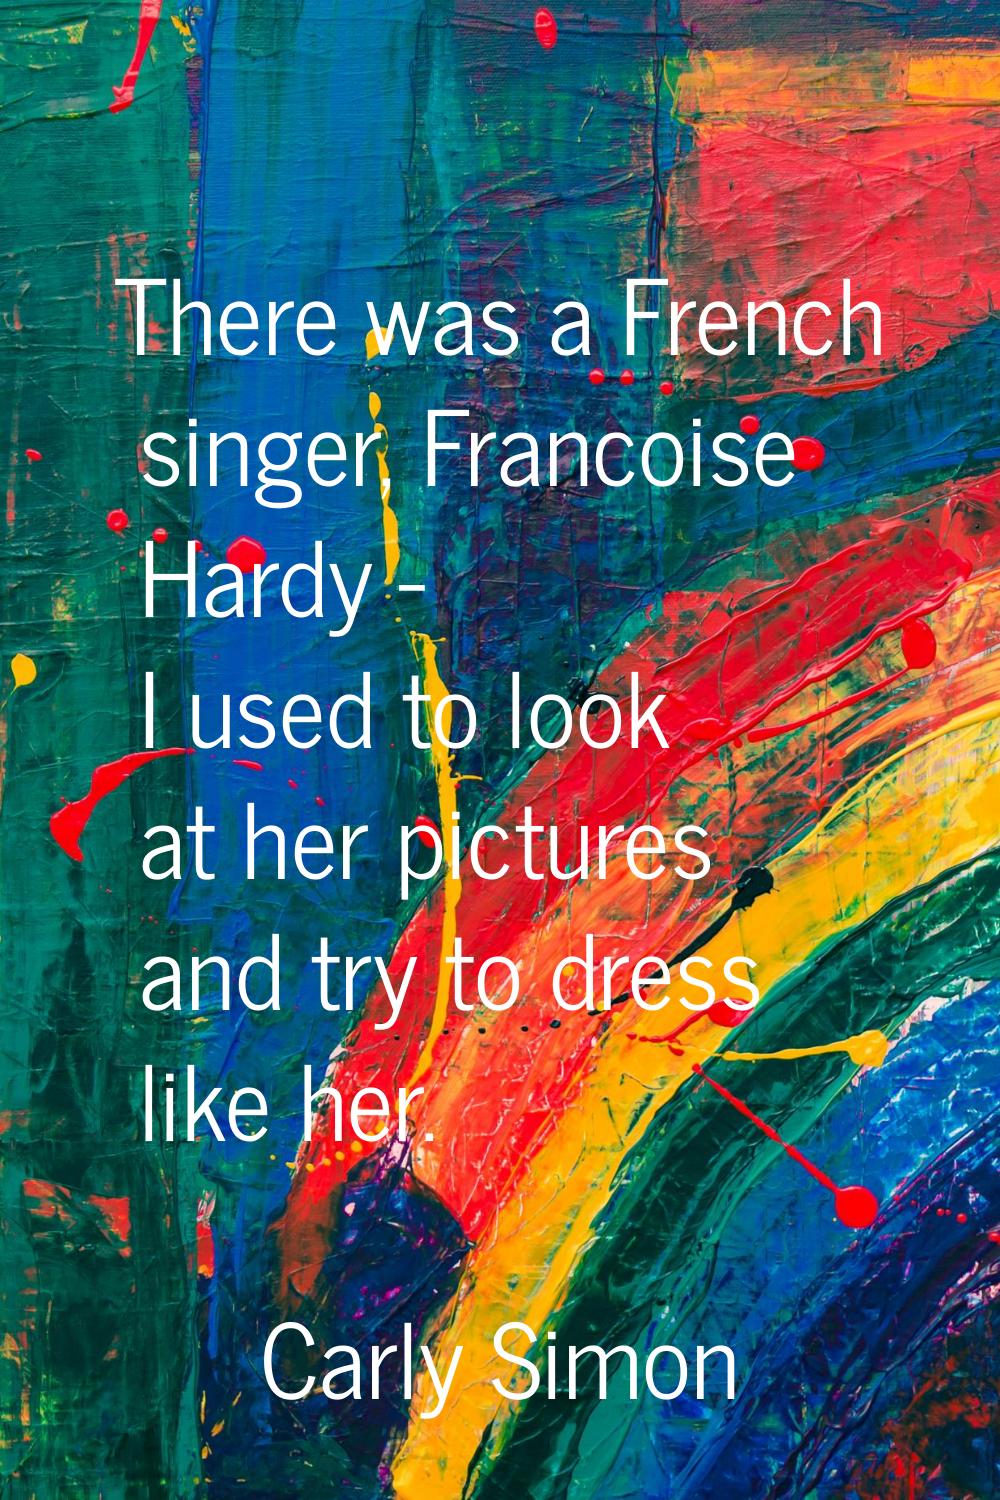 There was a French singer, Francoise Hardy - I used to look at her pictures and try to dress like h